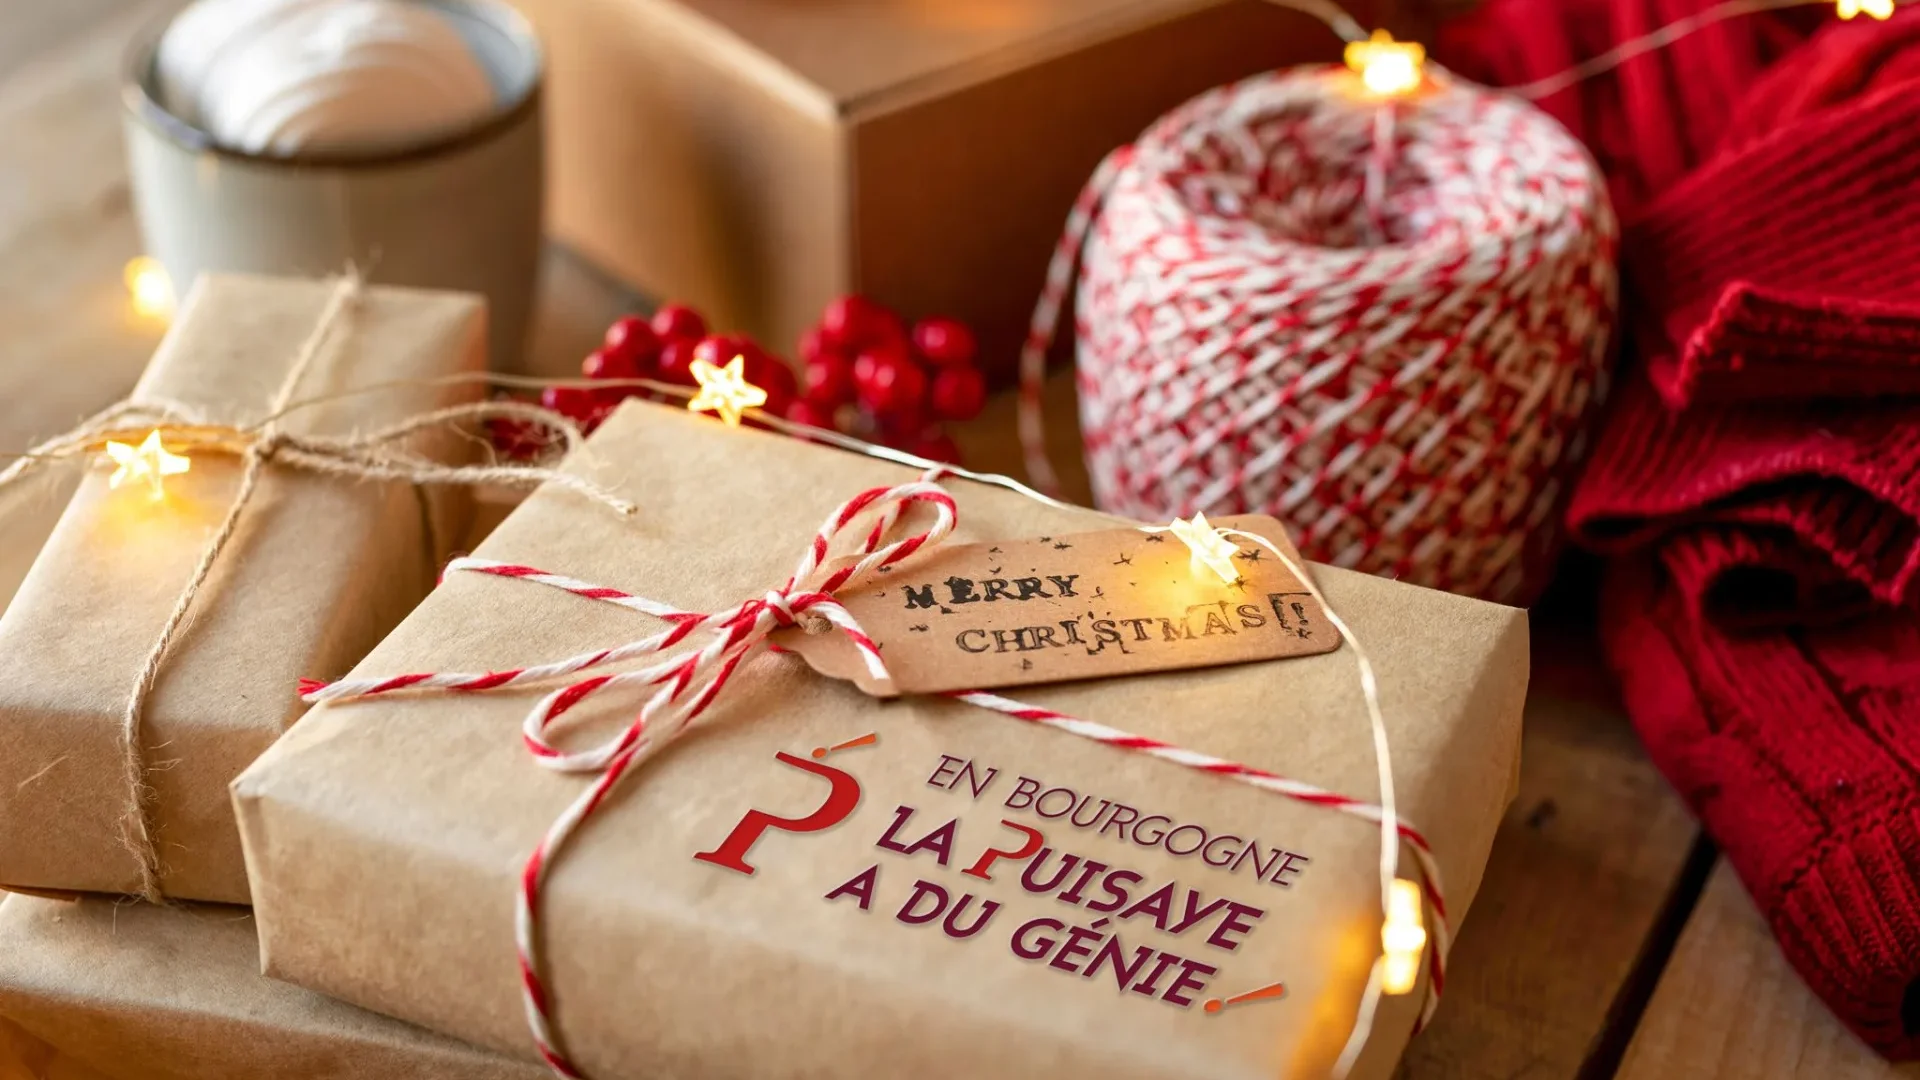 a gift “made in Puisaye” for Christmas